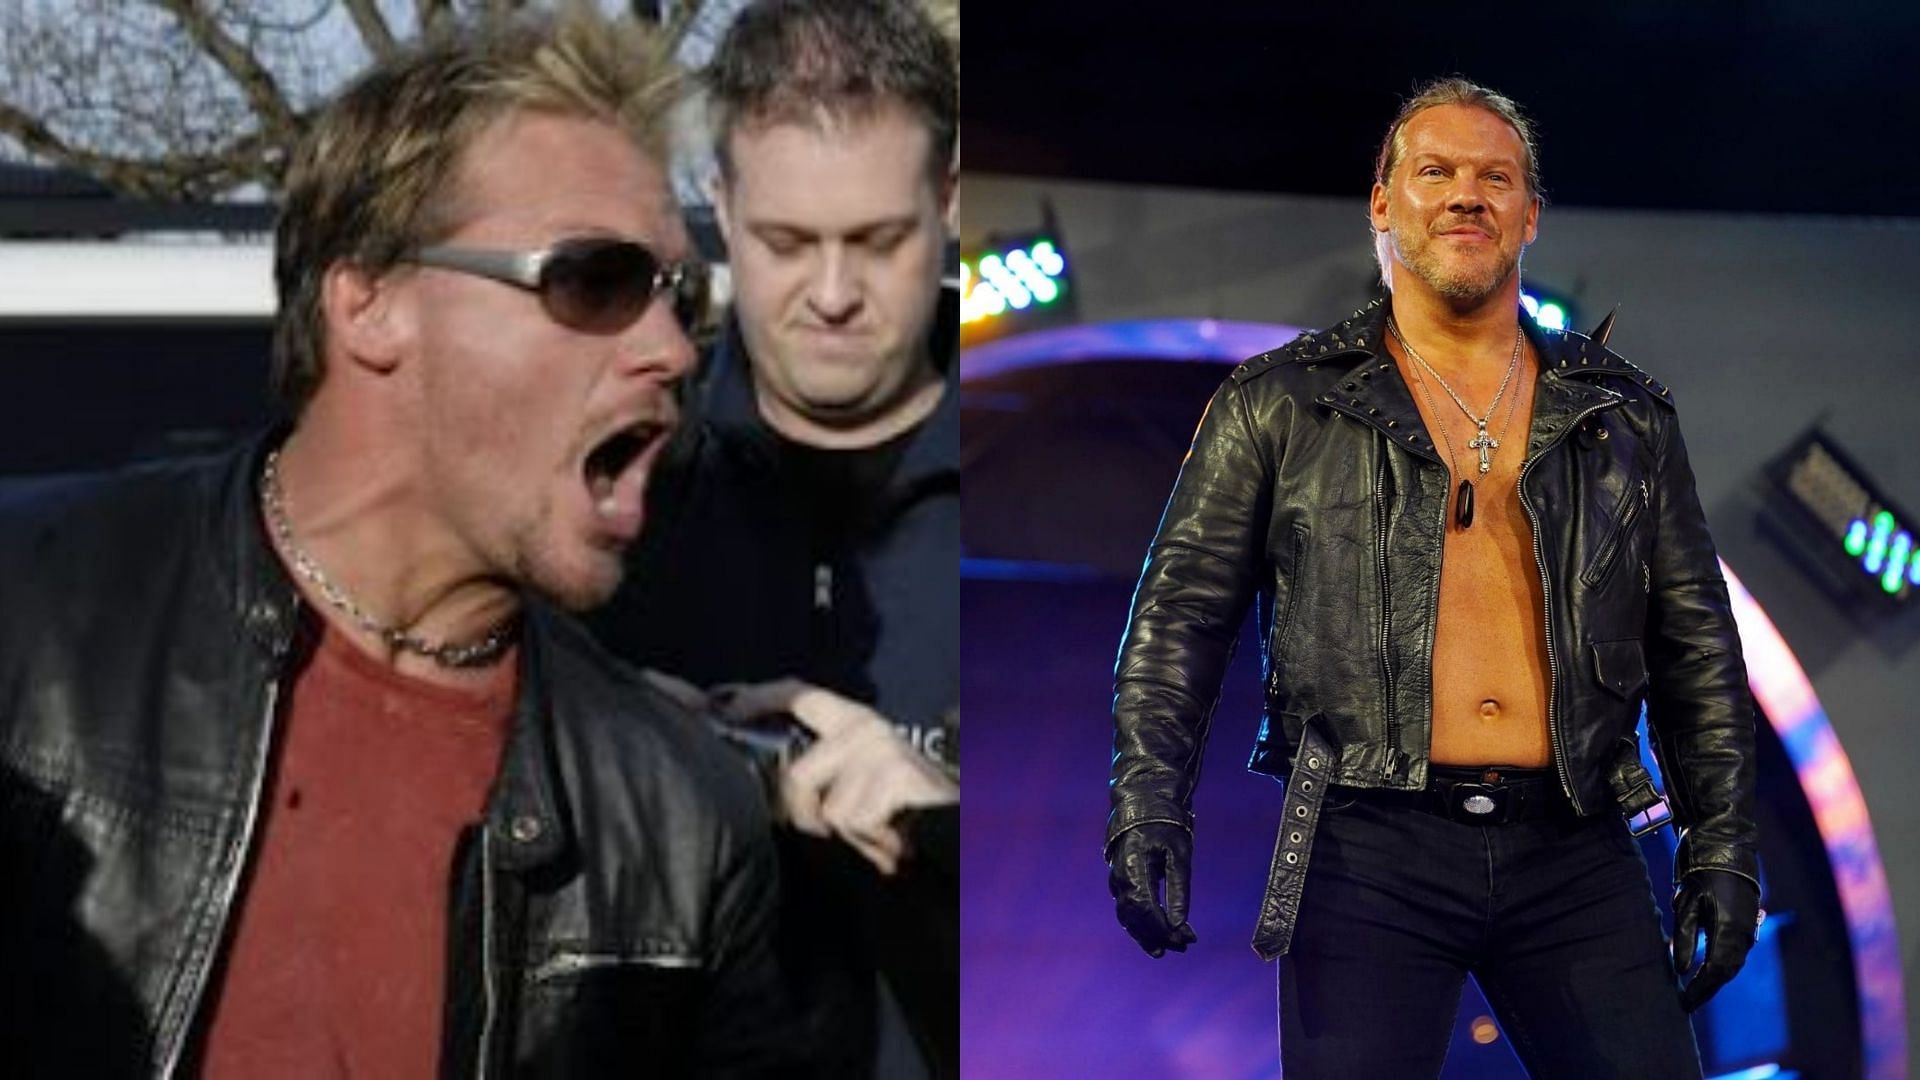 Chris Jericho got into a fight with fans in 2009